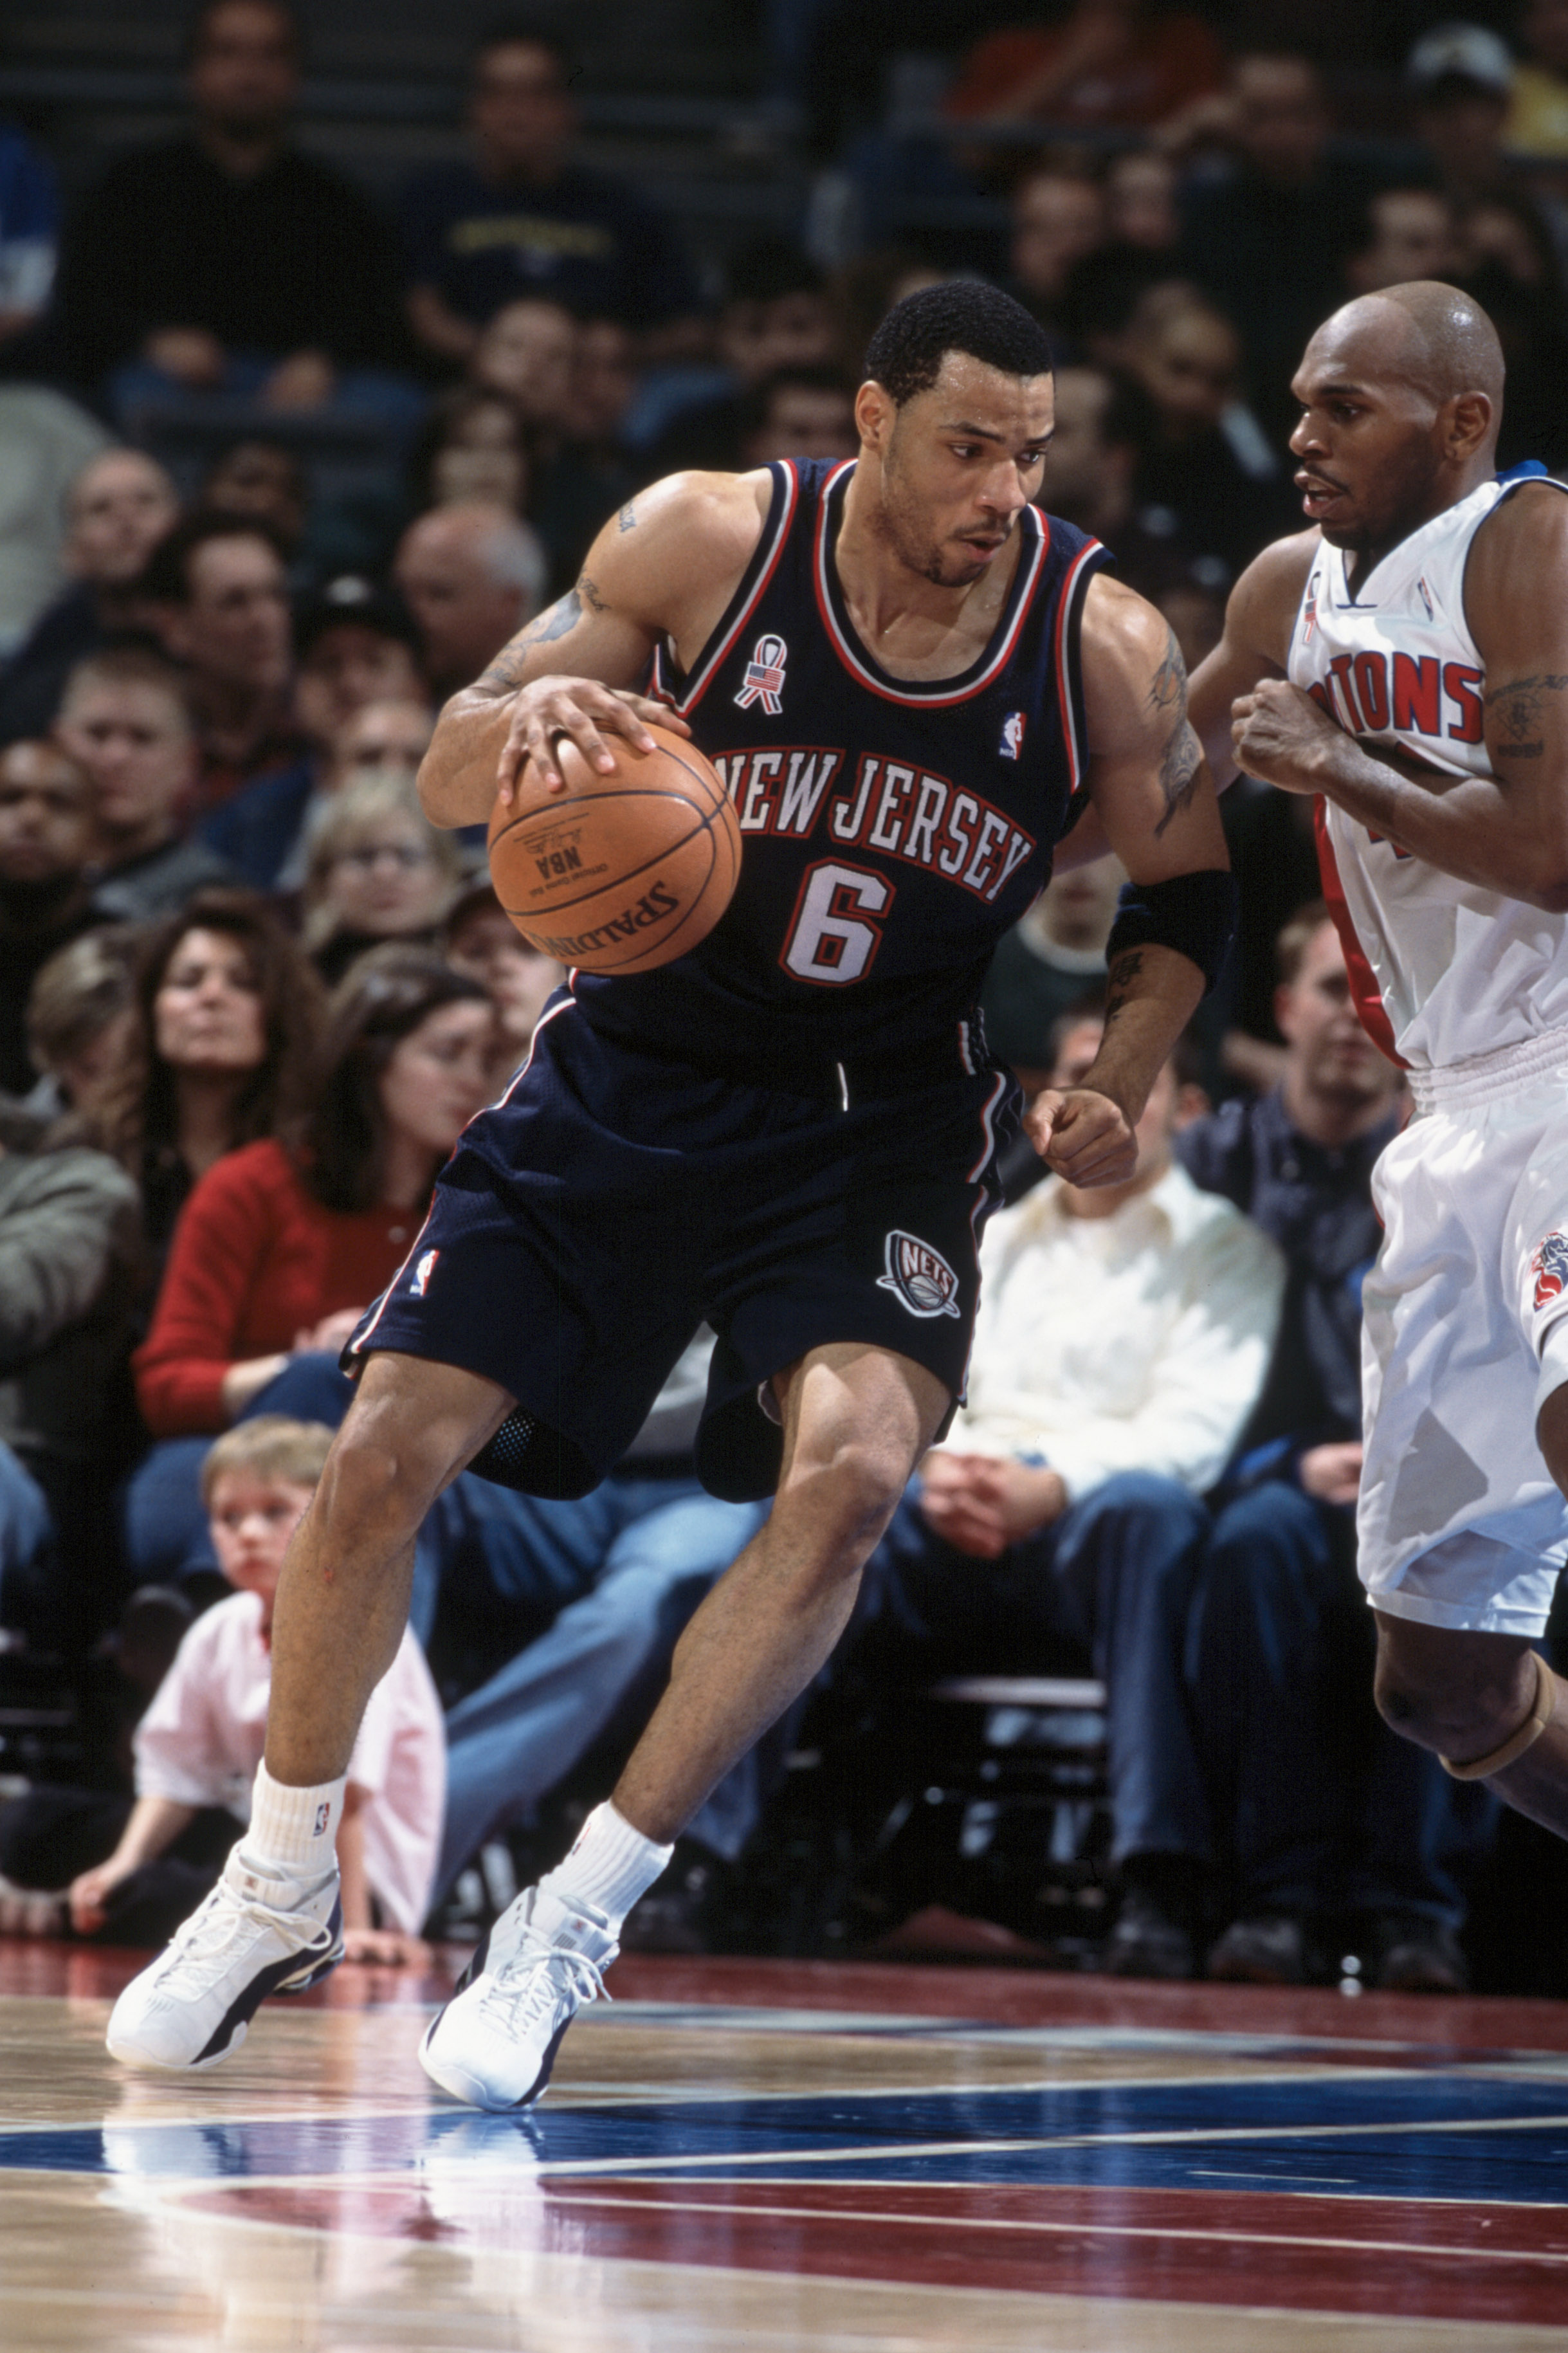 Kenyon Martin: Where is the former No. 1 overall pick now?